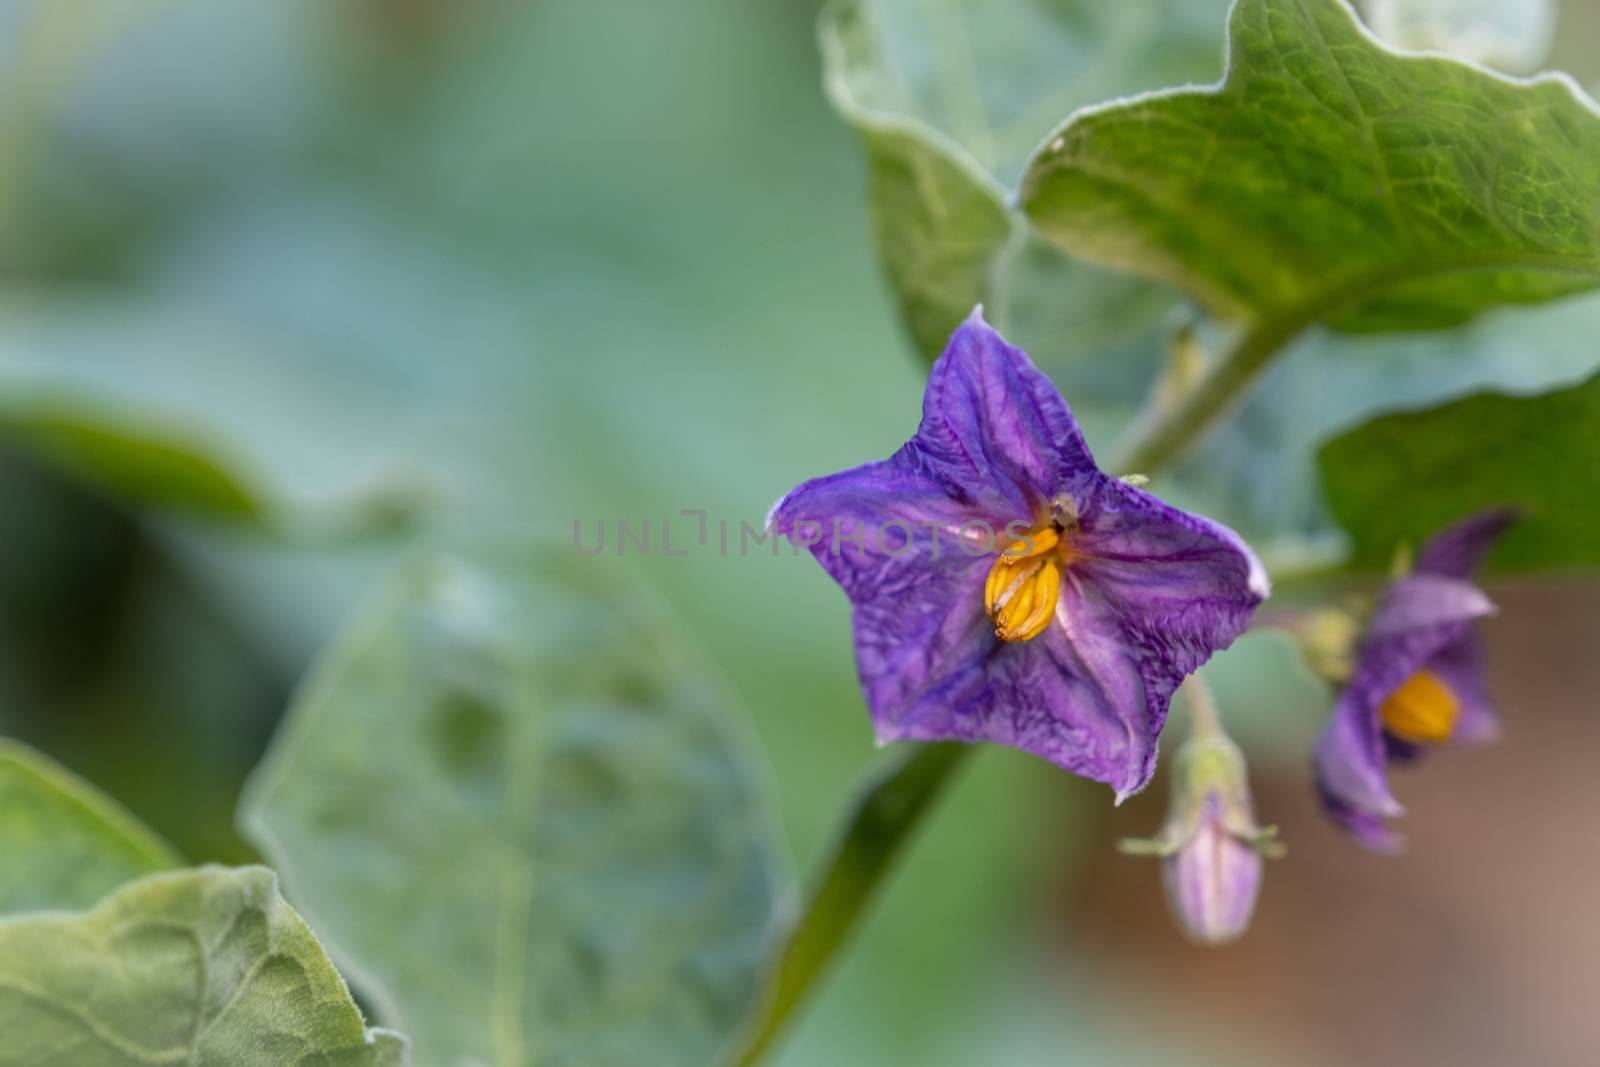 The Select focus Close up Thai Eggplant with flower on green leaf and tree with blur background by peerapixs